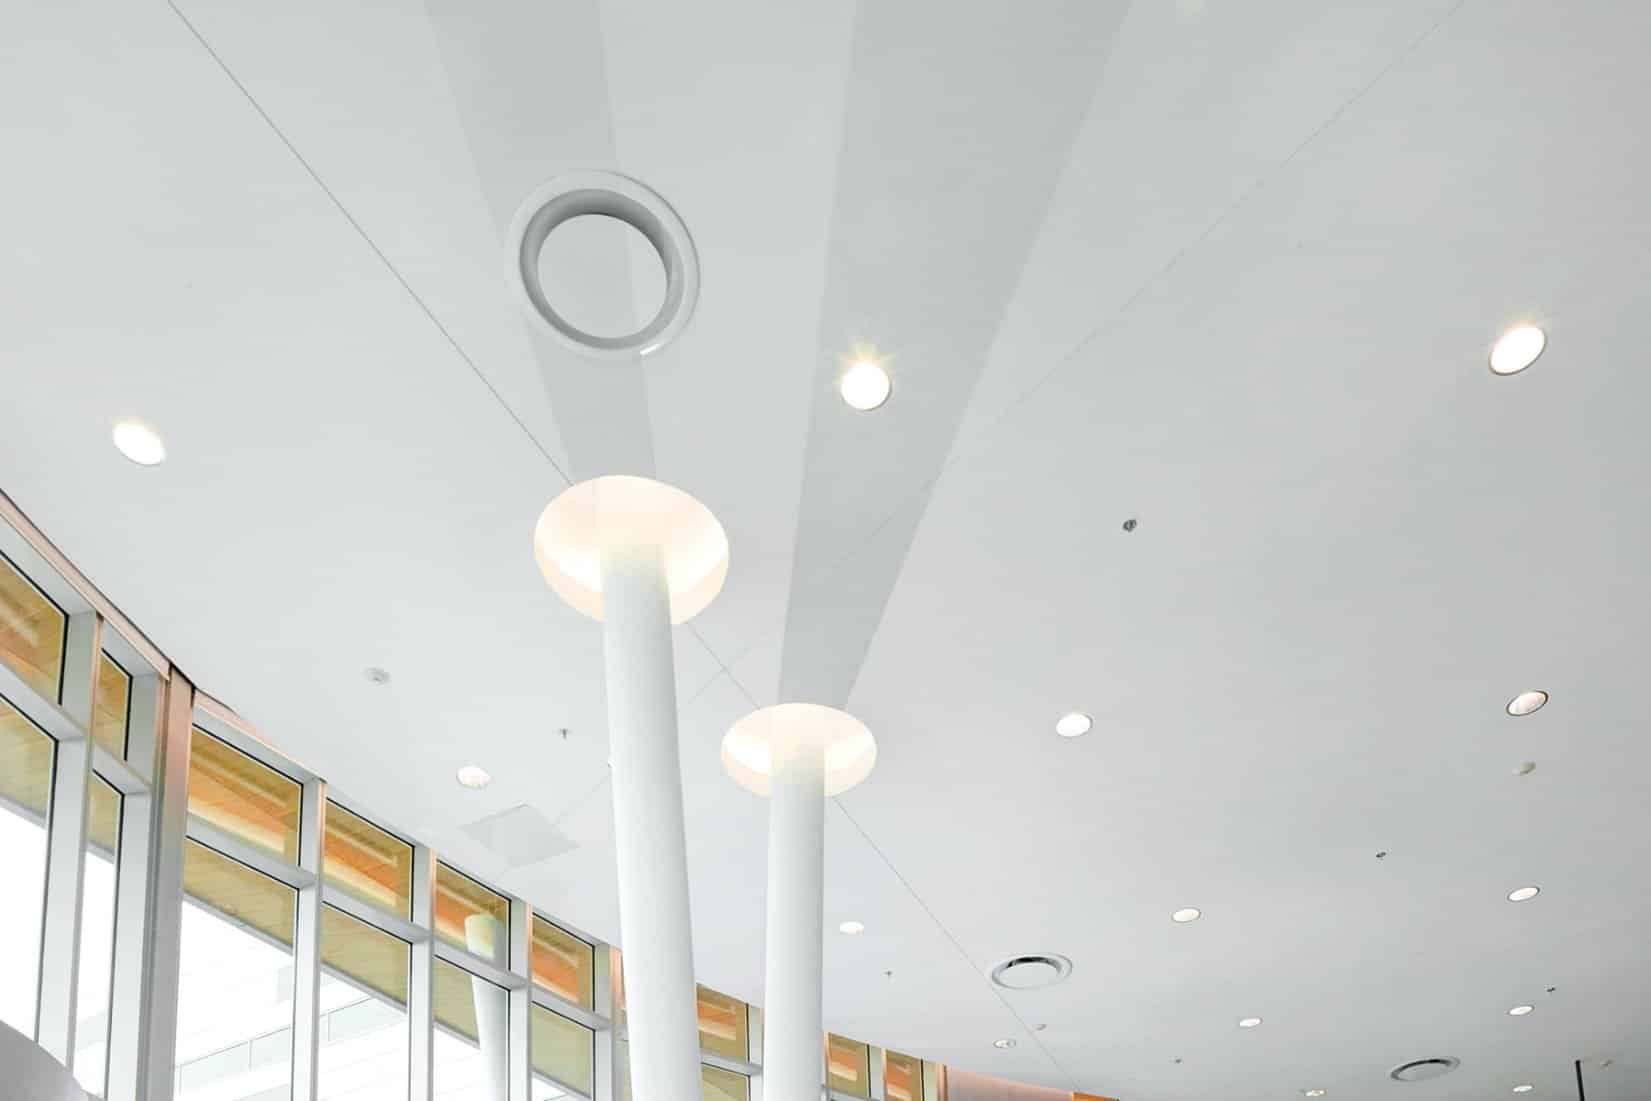 Bradleigh Applications, Inc. Acoustical Plaster Construction using BASWAphon at Catonsville Courthouse